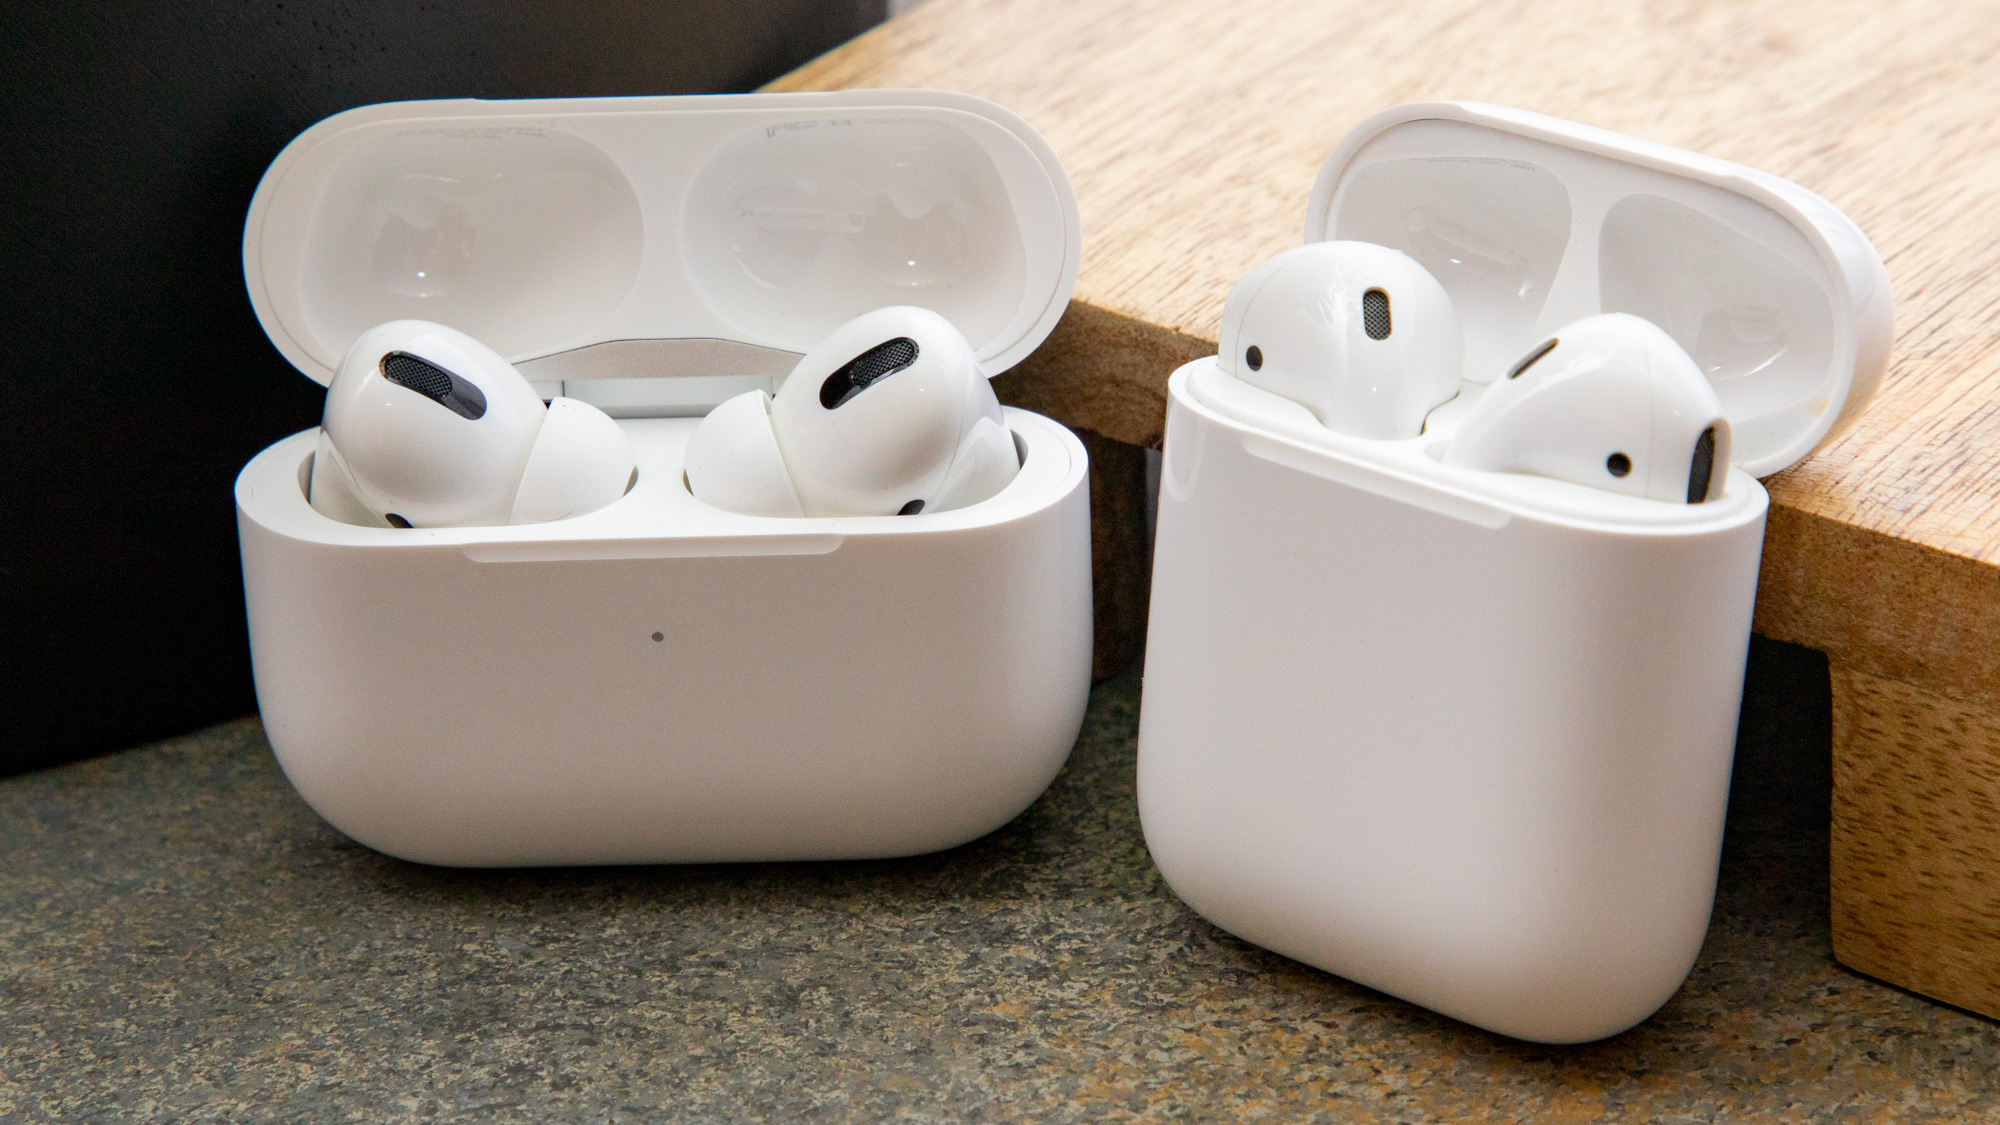 Apple AirPods vs AirPods Pro: is it worth upgrading to the newer true